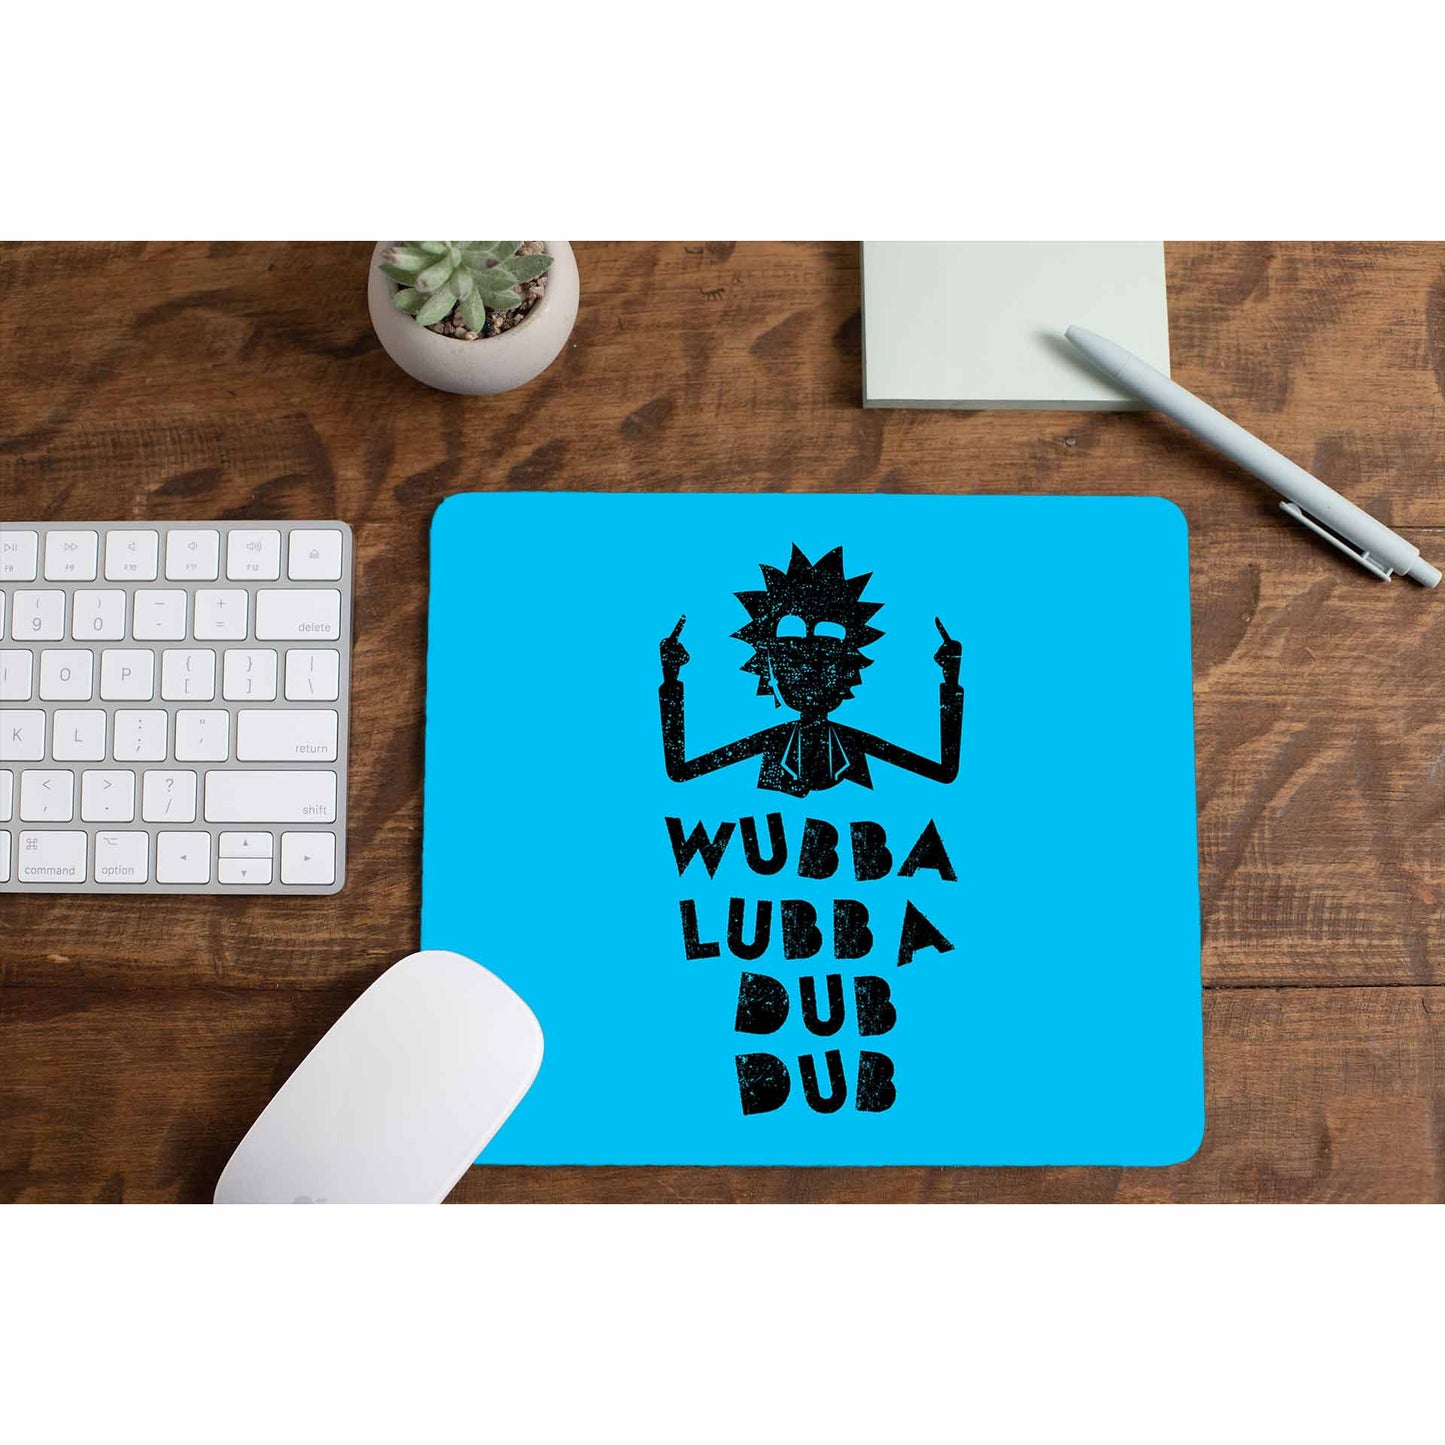 rick and morty wubba lubba dub dub mousepad logitech large anime buy online india the banyan tee tbt men women girls boys unisex  rick and morty online summer beth mr meeseeks jerry quote vector art clothing accessories merchandise